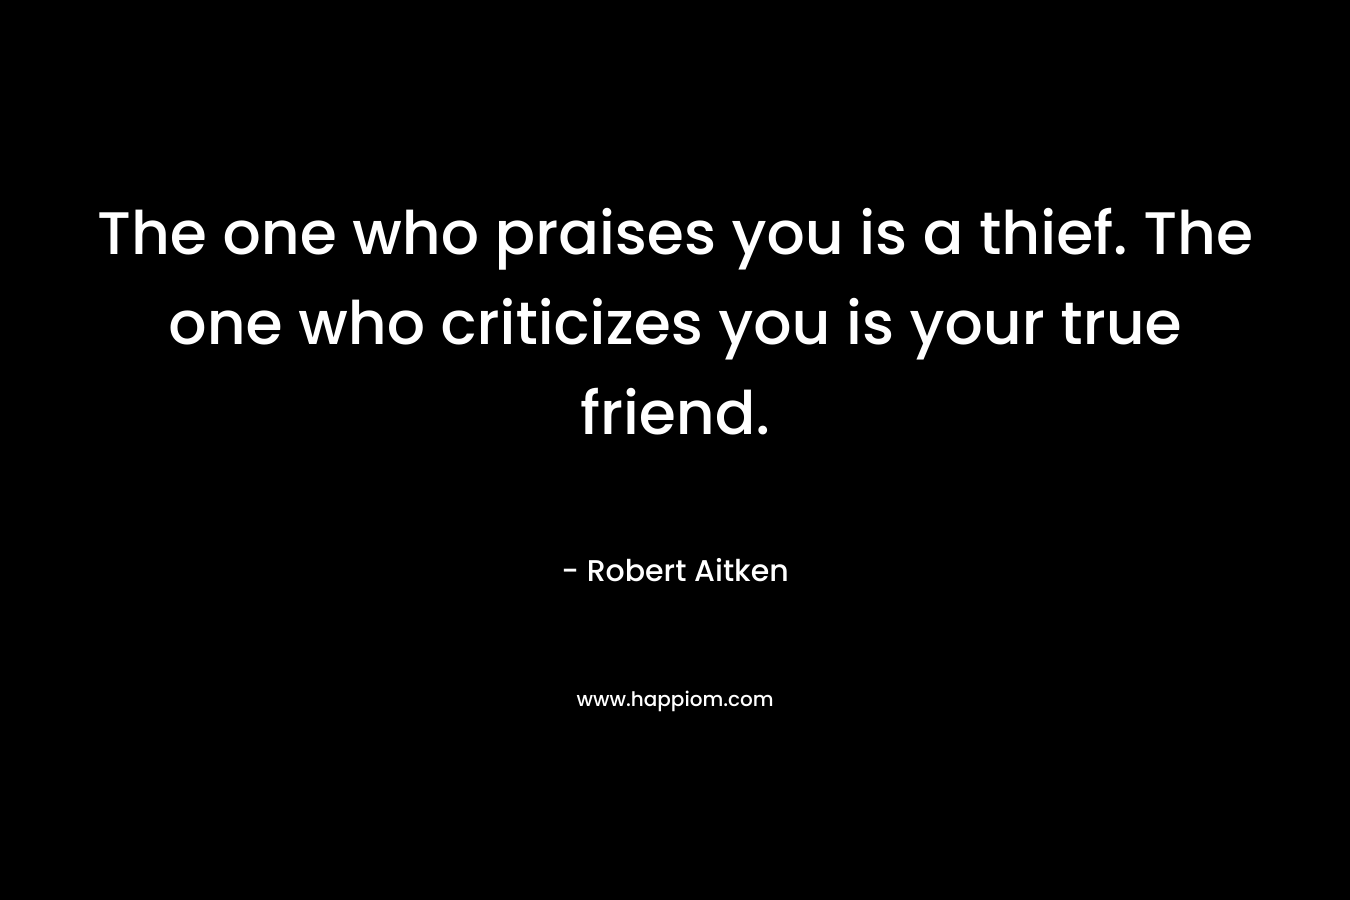 The one who praises you is a thief. The one who criticizes you is your true friend. – Robert Aitken